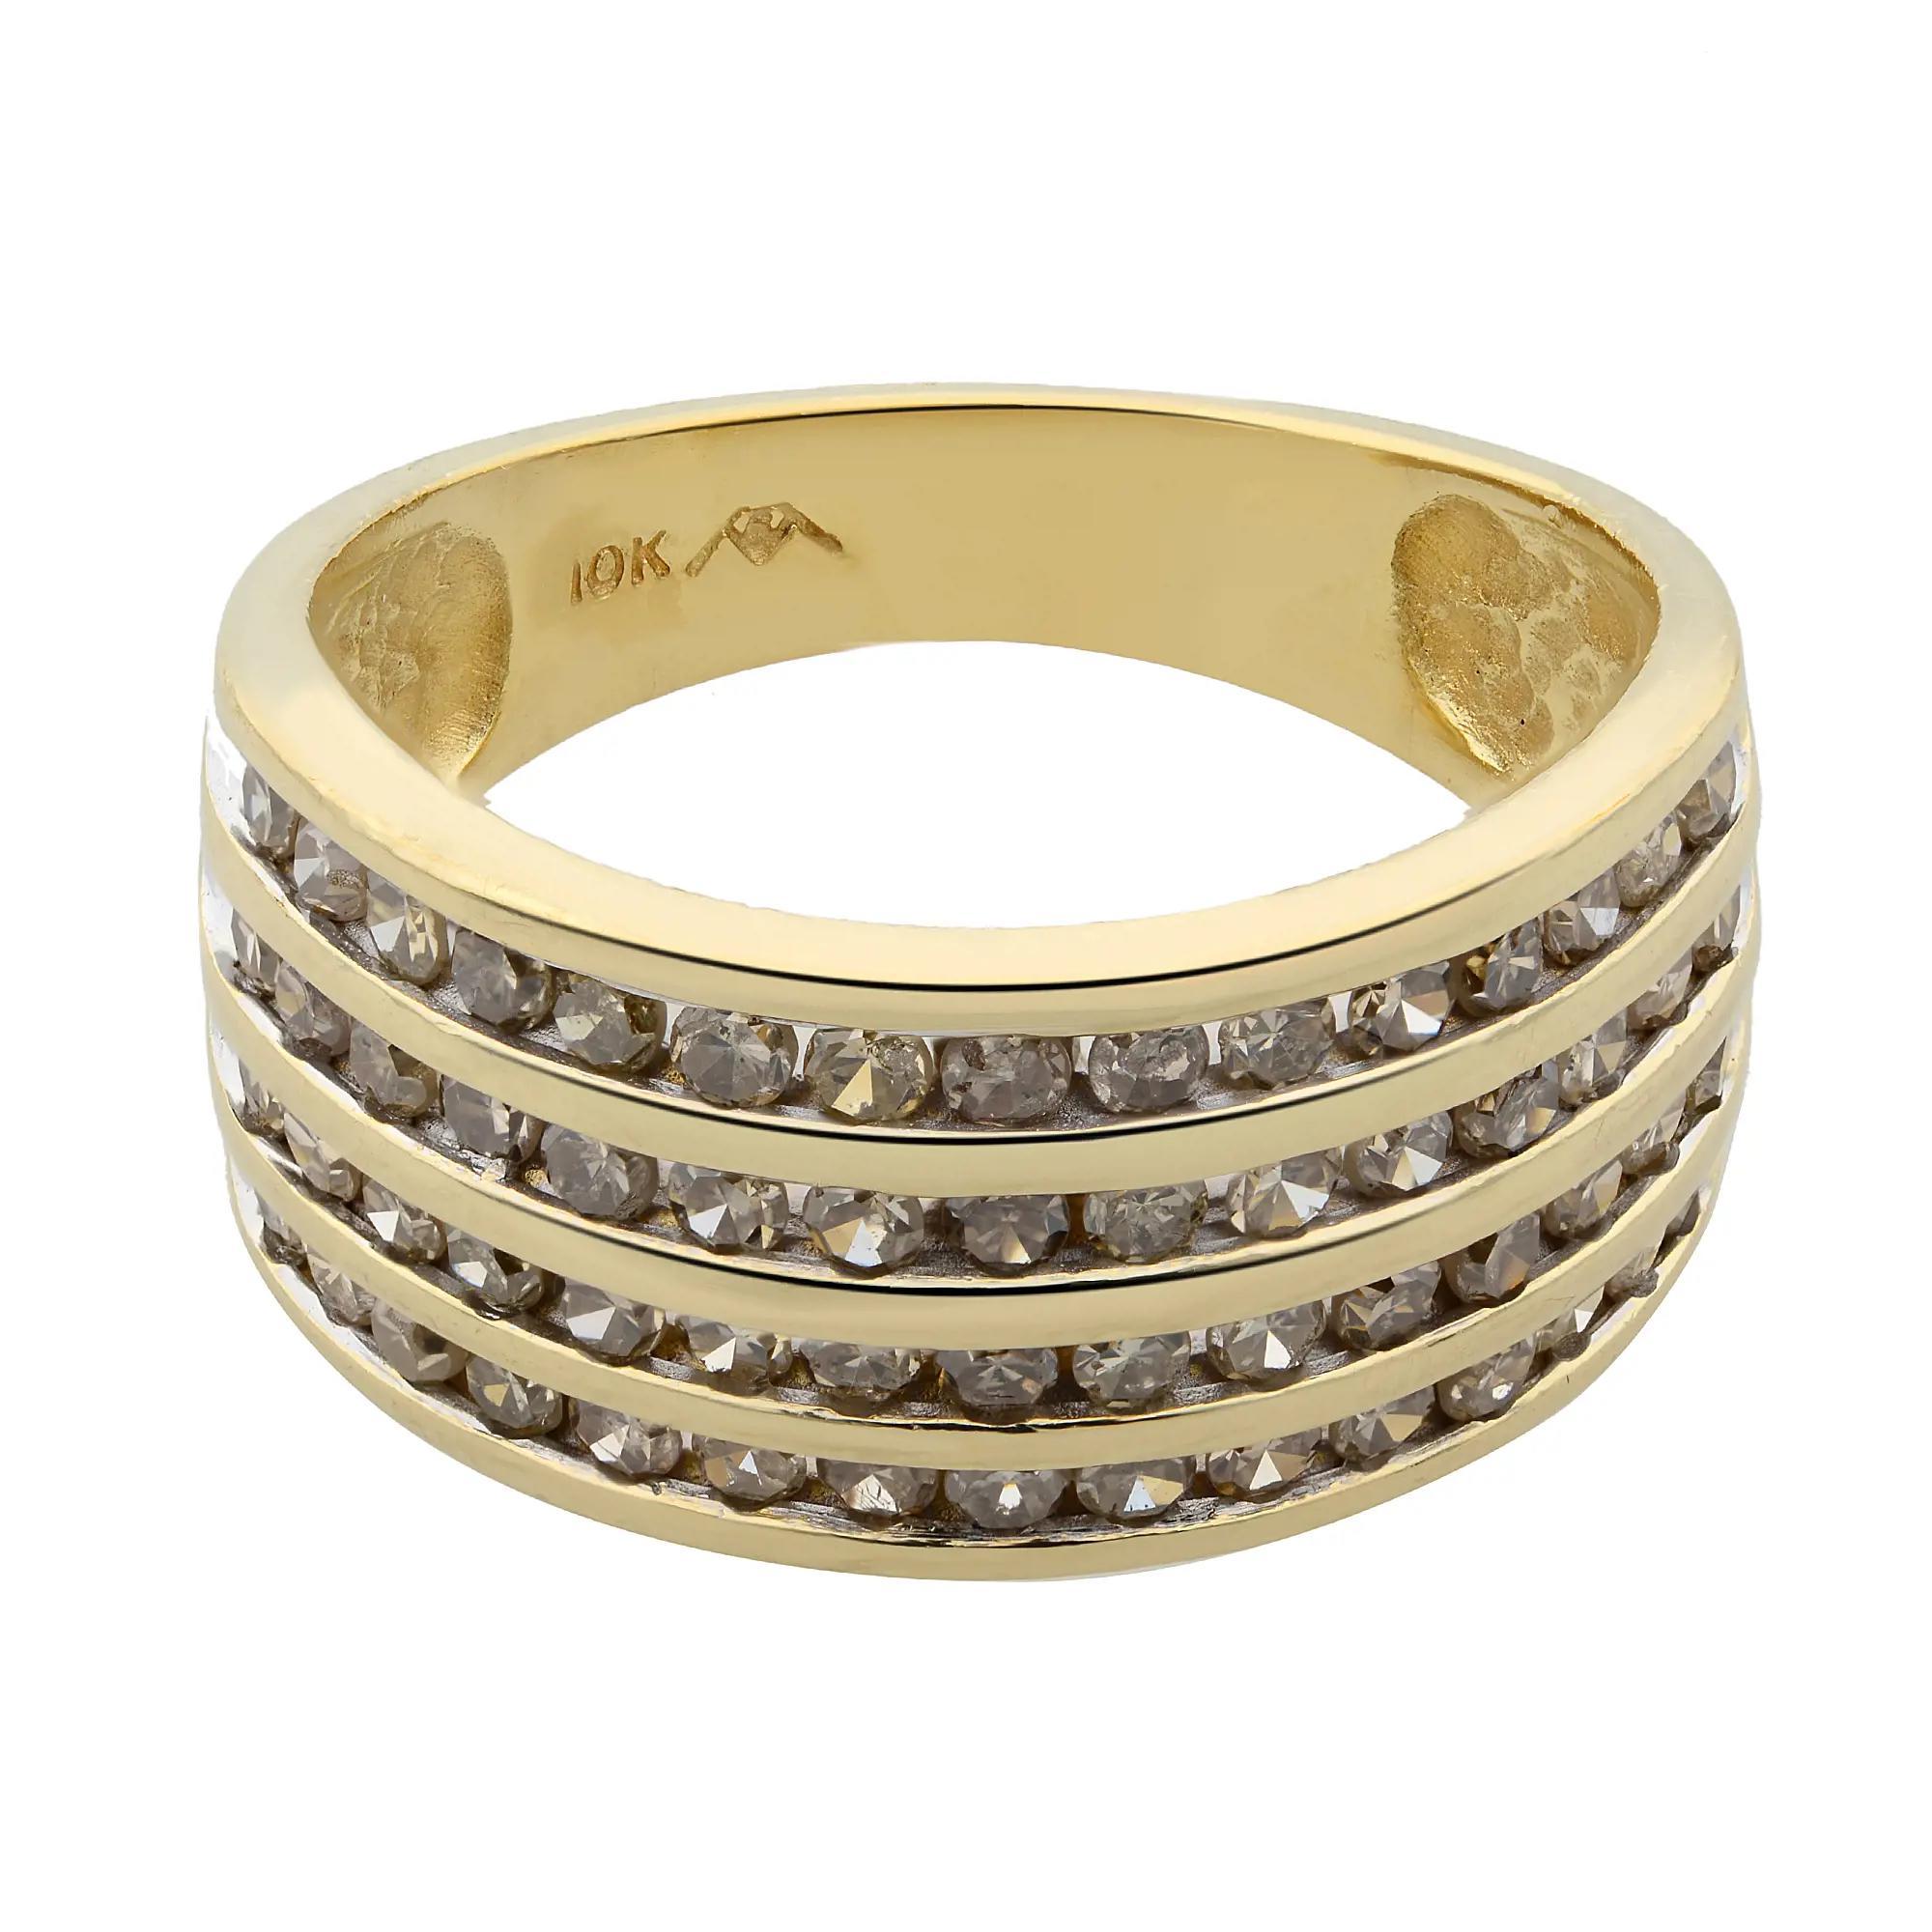 This elegant and classic diamond wedding band ring is crafted in 10k yellow gold. Features four rows of channel set round brilliant cut diamonds weighing 1.00 carat. Ring width: 9.3 mm. Ring size: 7.25. Total weight: 5 grams. Great pre-owned